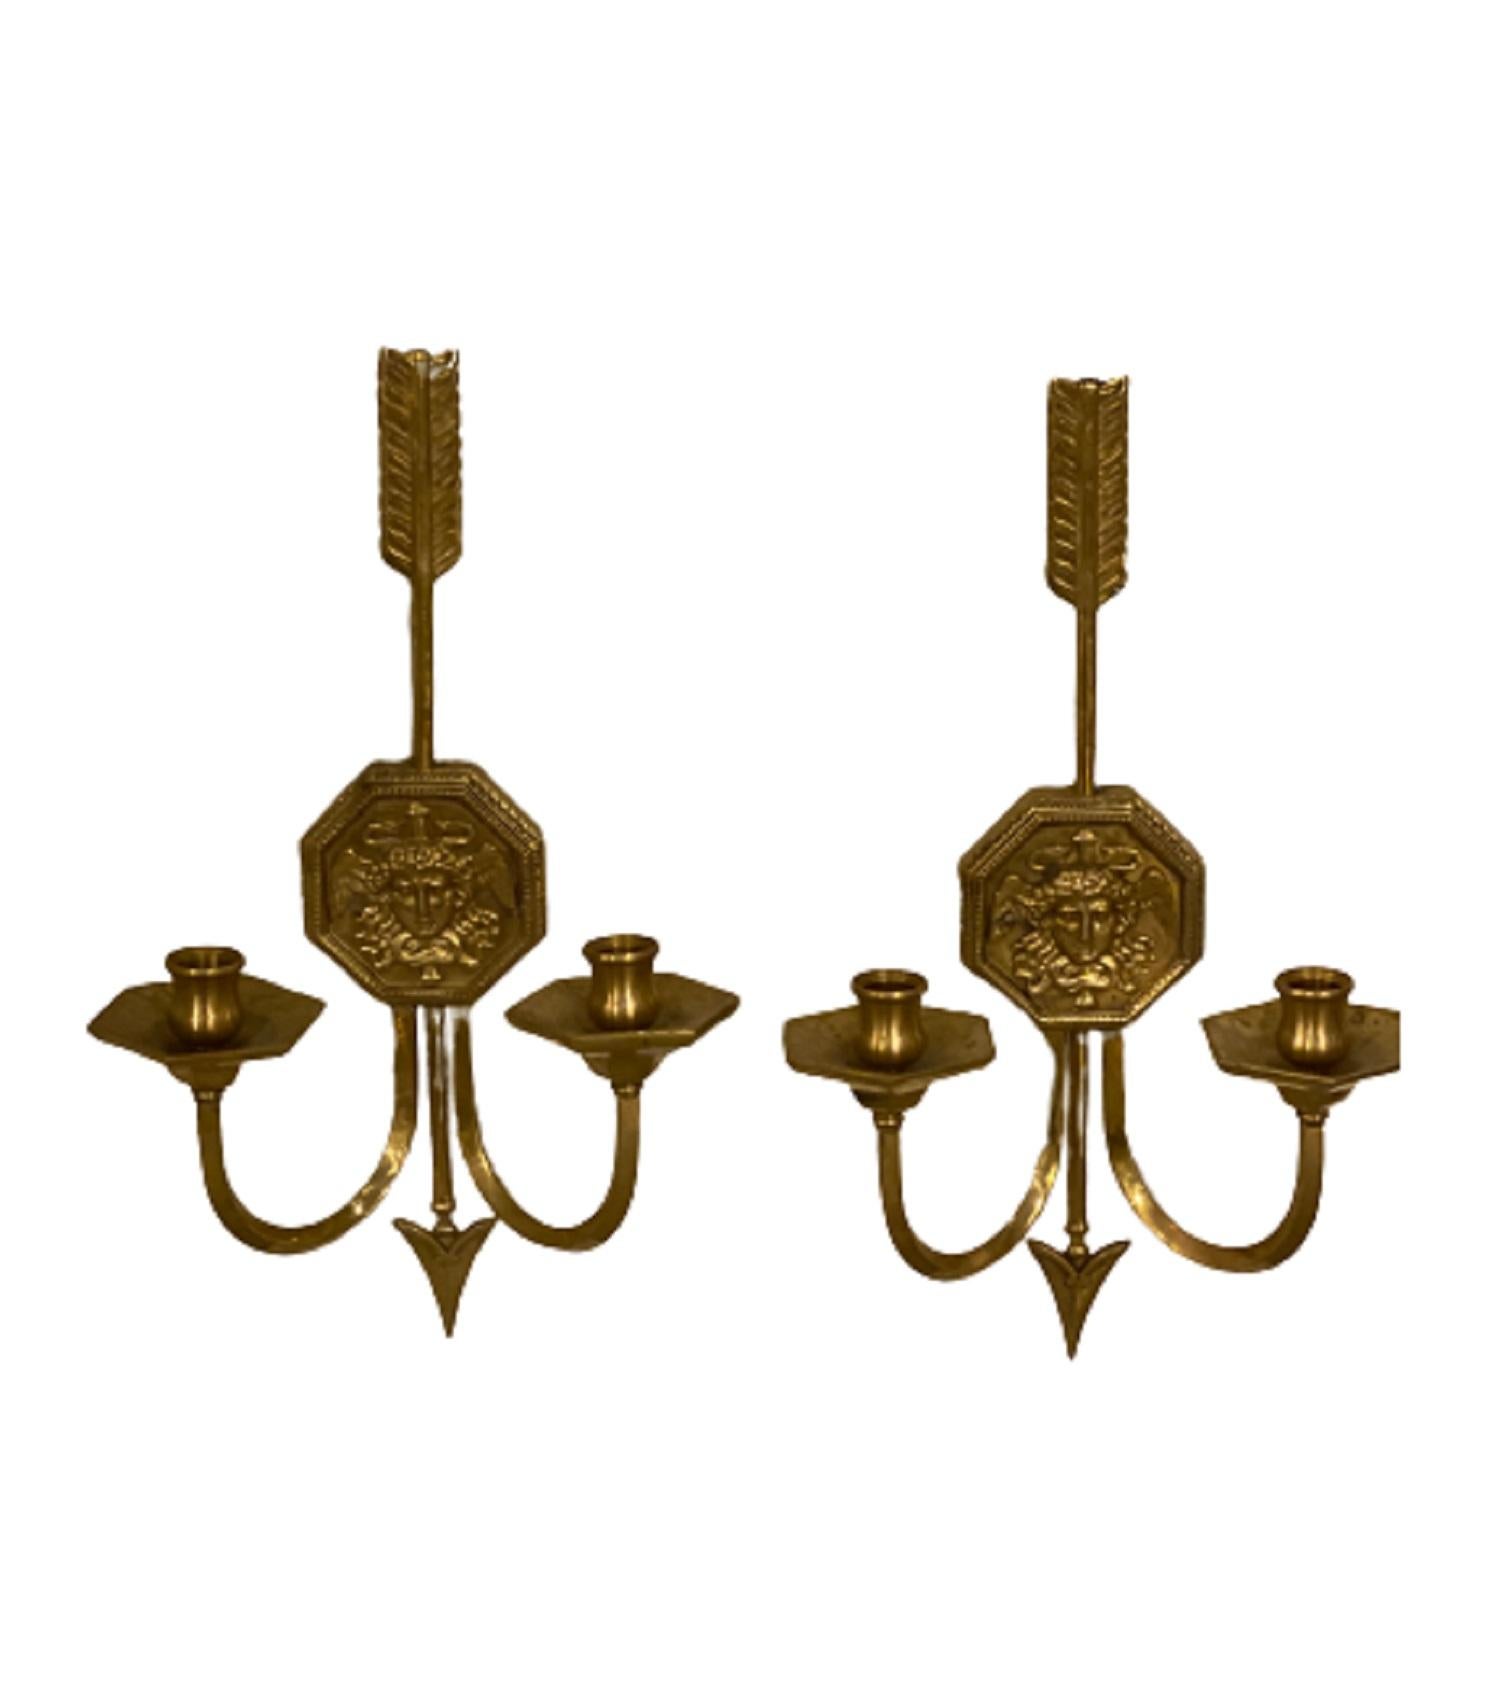 A pair of golden sconces with Medusa head design, circa 1920s. In very good vintage condition.

Dealer: G302YP